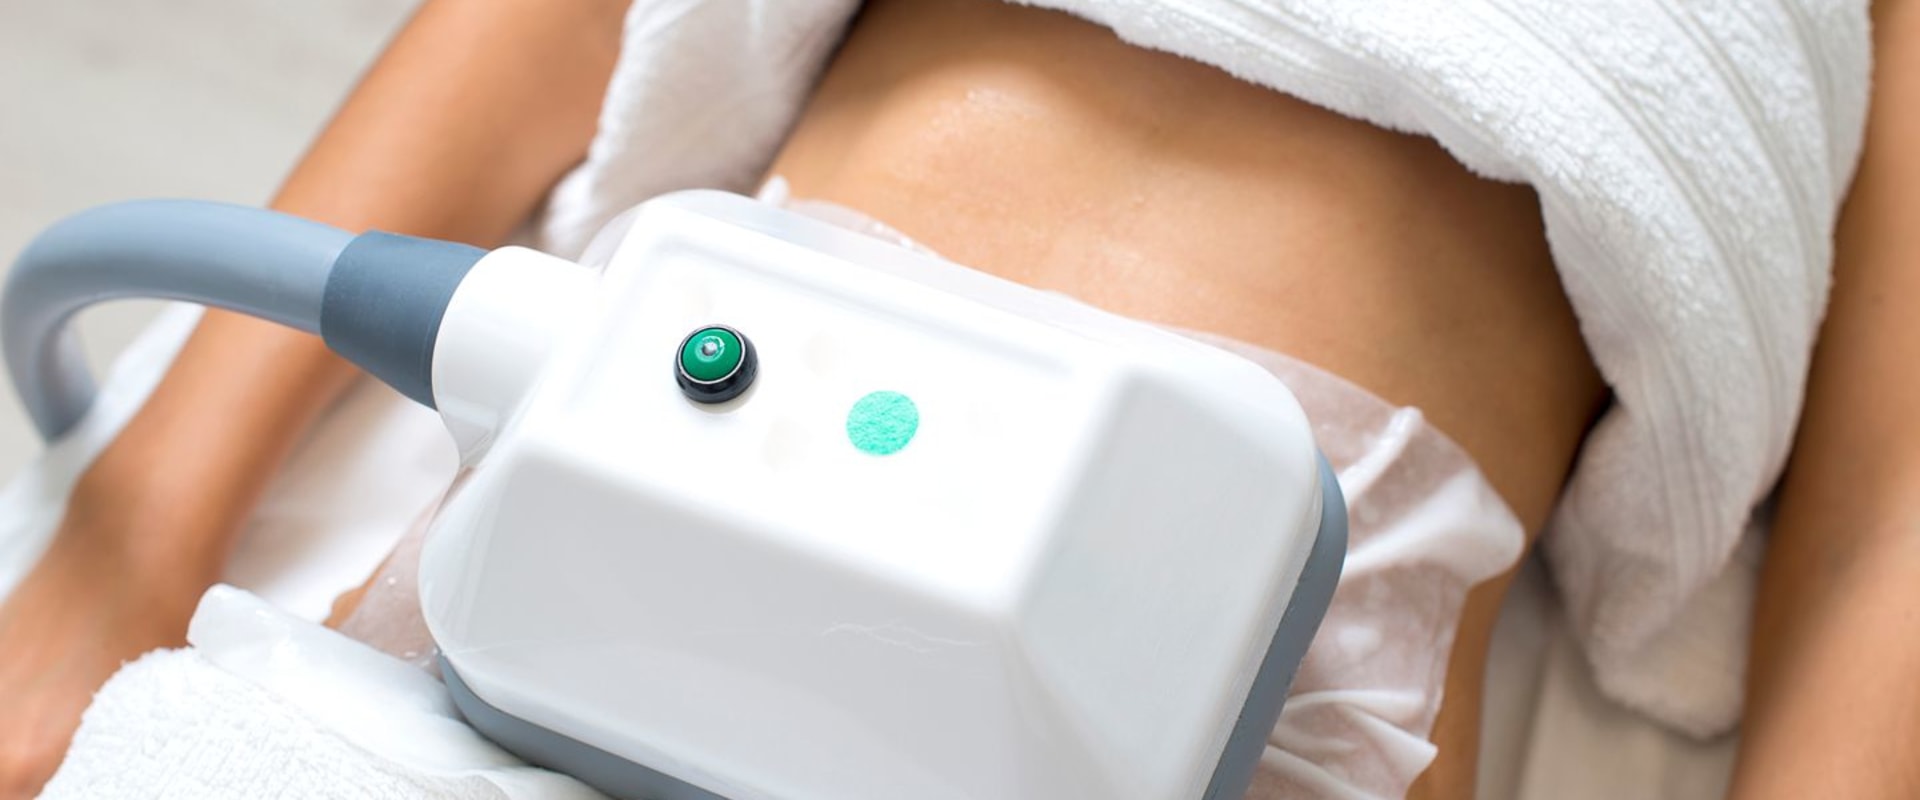 What are the Benefits of Non-Invasive Fat Reduction Treatments?